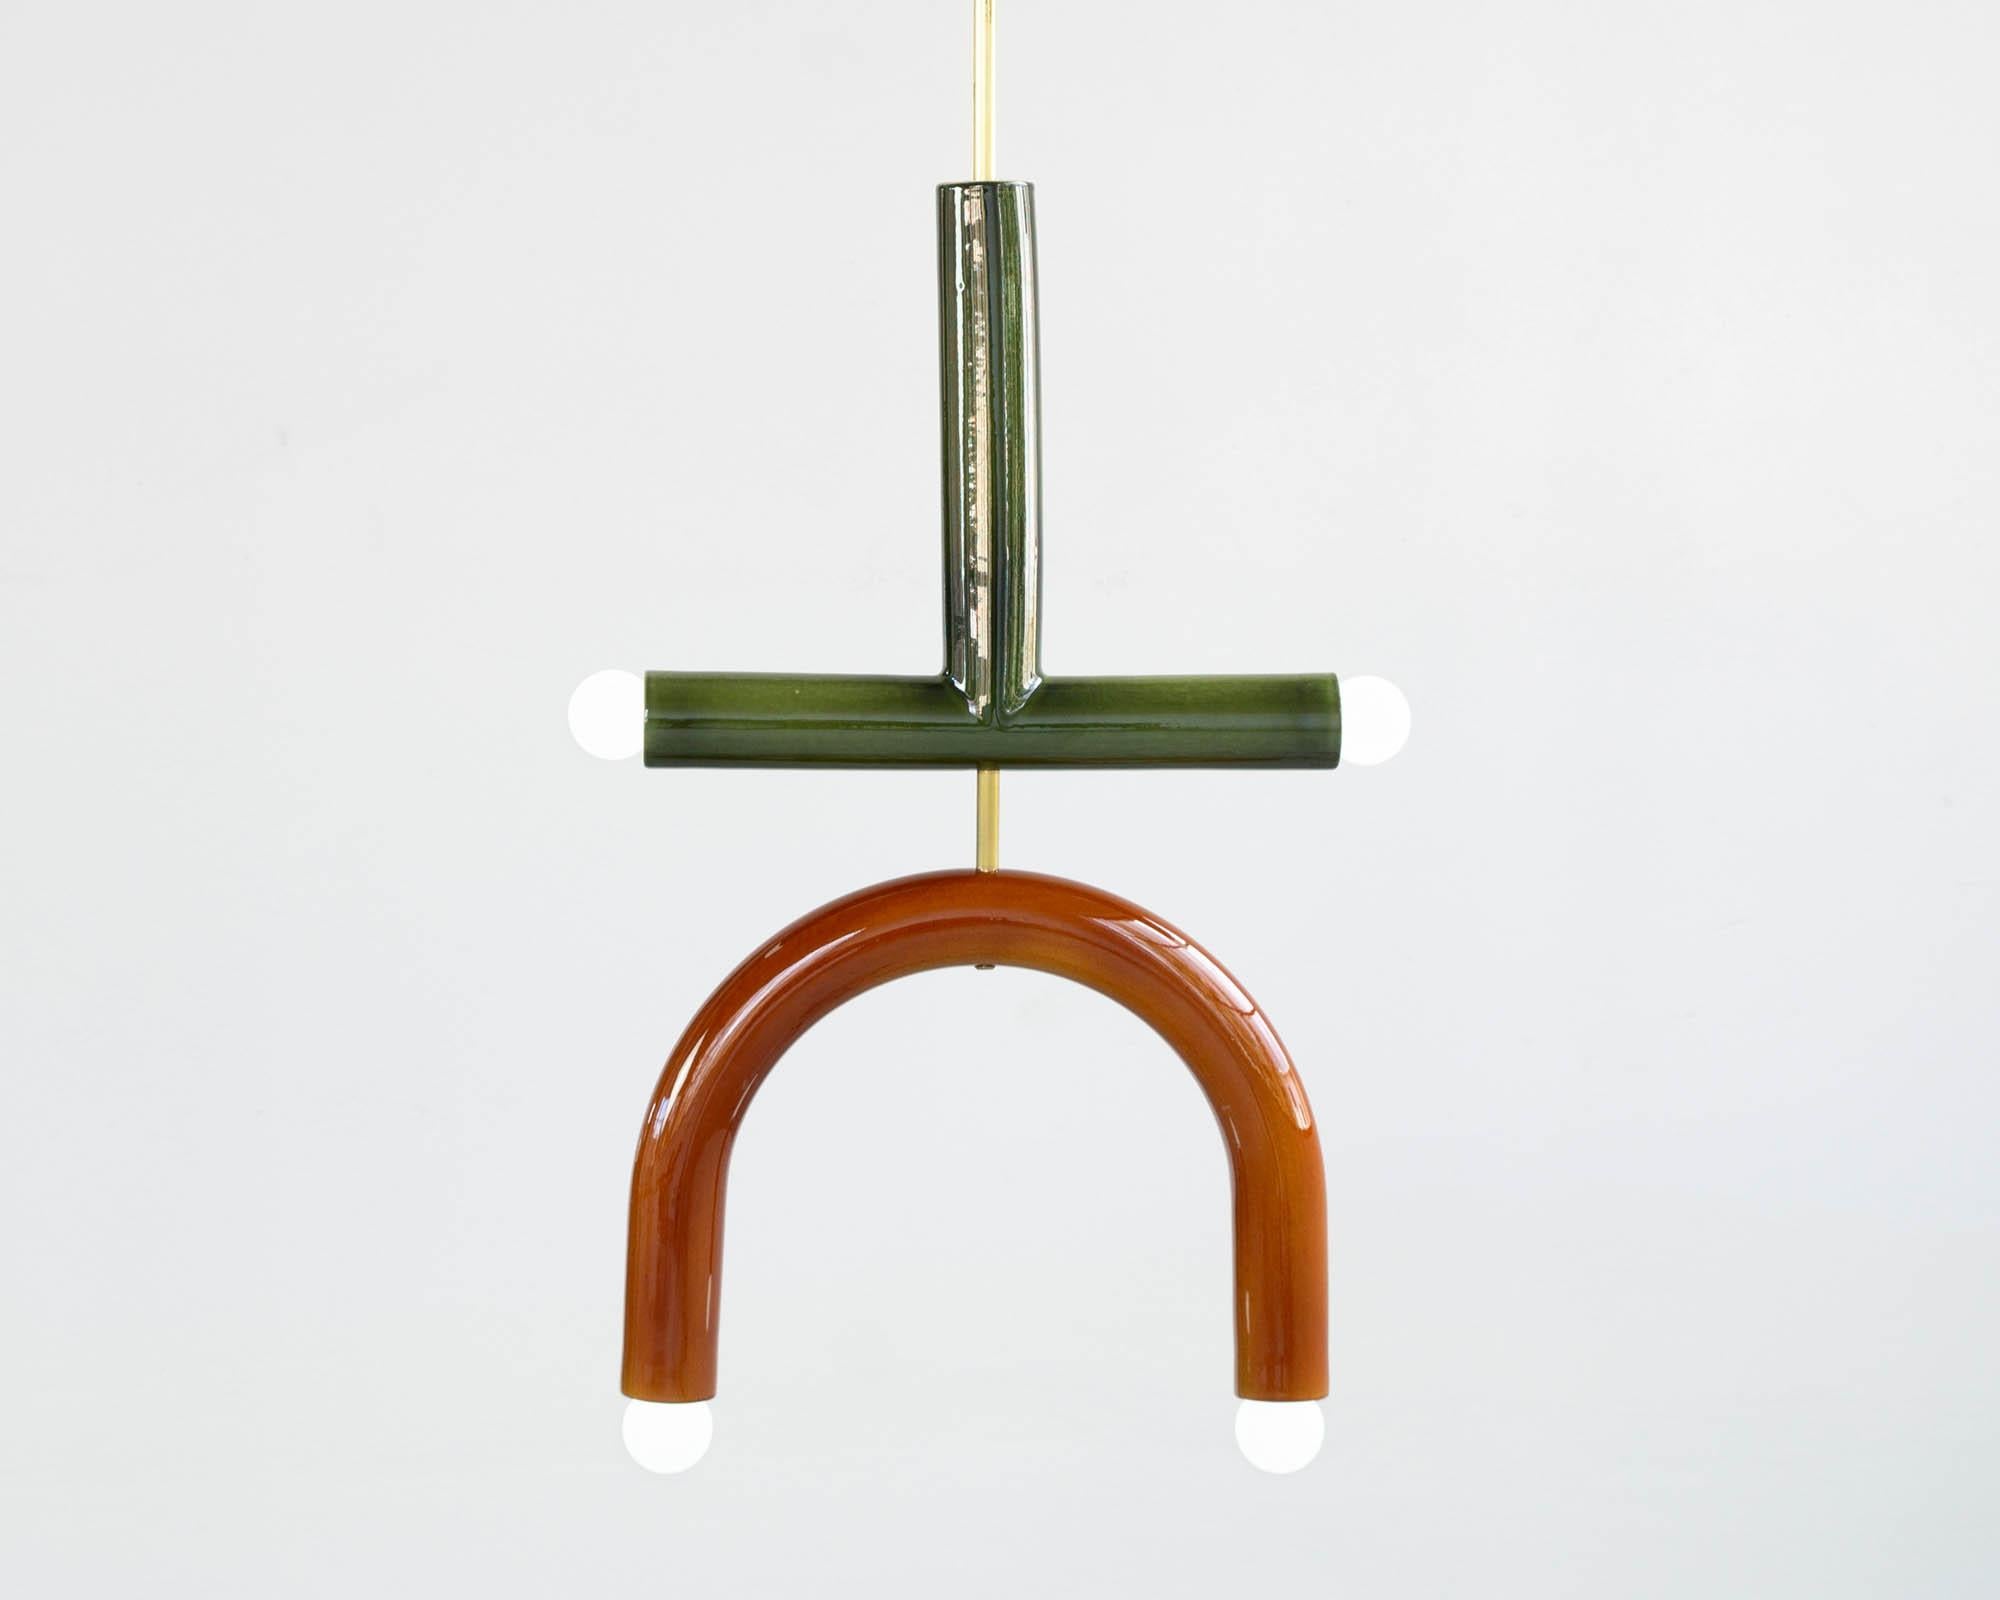 TRN C2 Pendant lamp / ceiling lamp / chandelier 
Signed by Pani Jurek

Dimensions: H 62.5 x 35 x 5 cm
Model shown: Green & ochre 

Bulb (not included): E27/E26, compatible with US electric system

Materials: Hand-glazed ceramic and brass
Rod: brass,